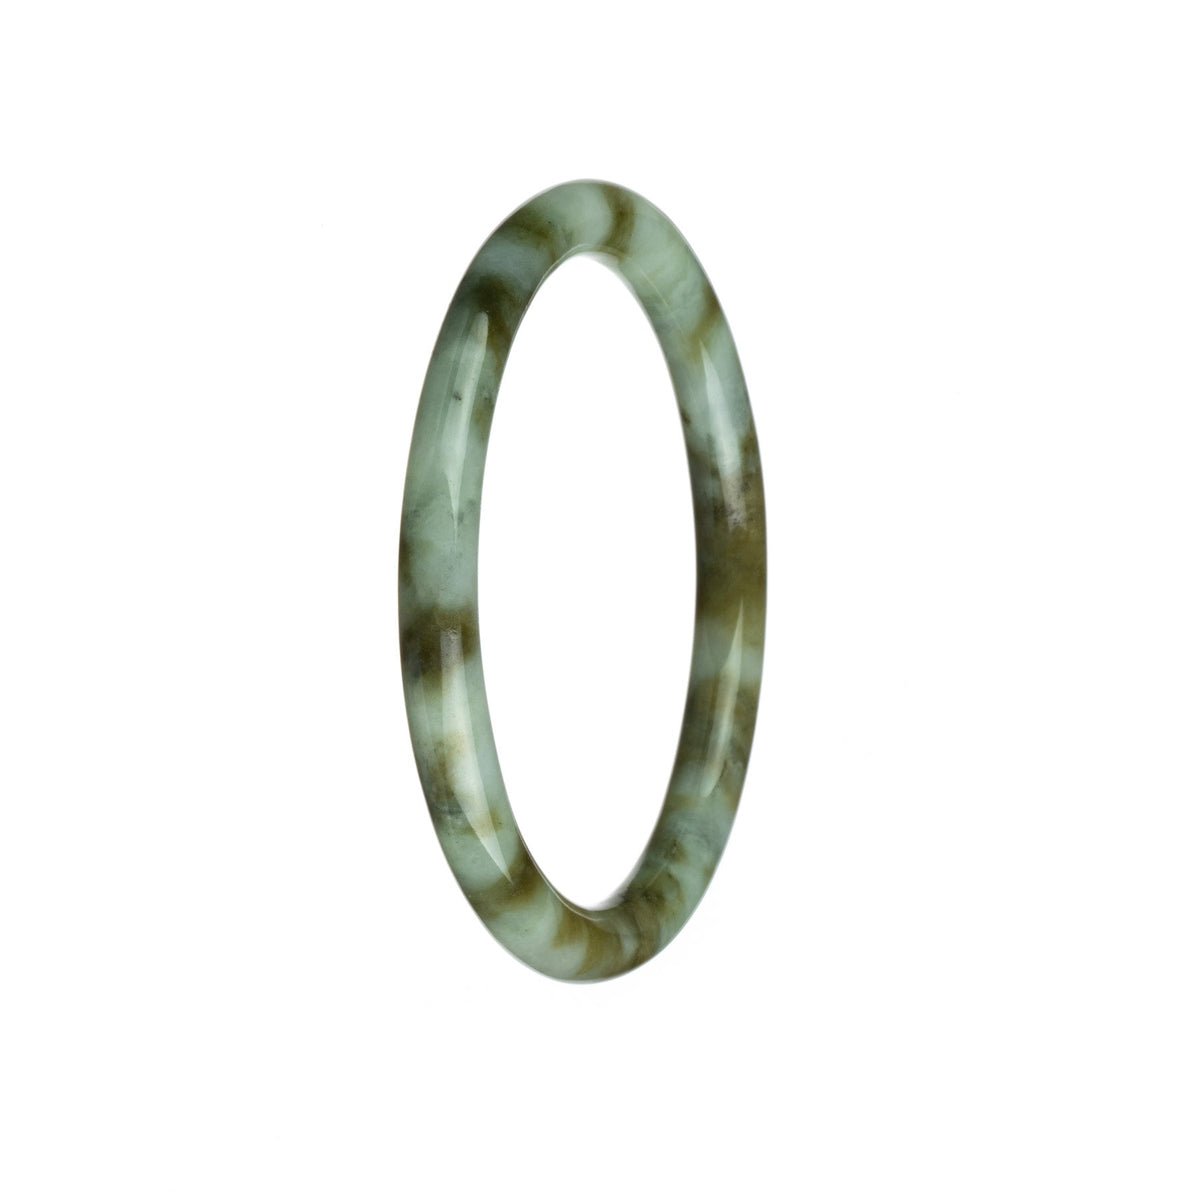 A small round jadeite bracelet in a white and brown pattern, perfect for adding a touch of elegance to any outfit.